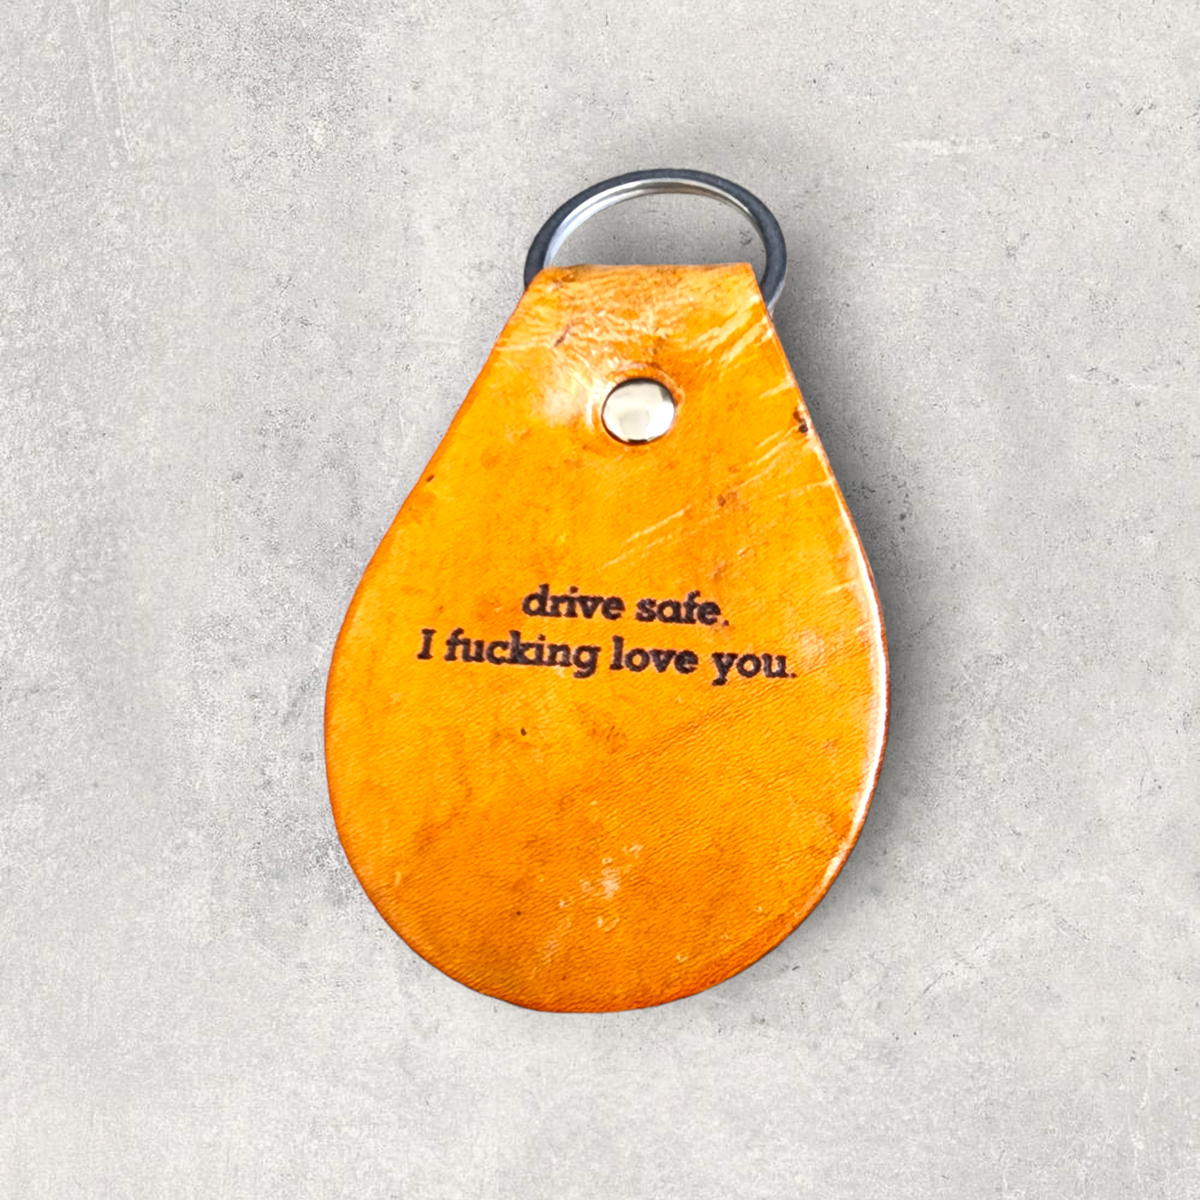 Engraved Leather Keychain -Drive safe. I fucking love you.